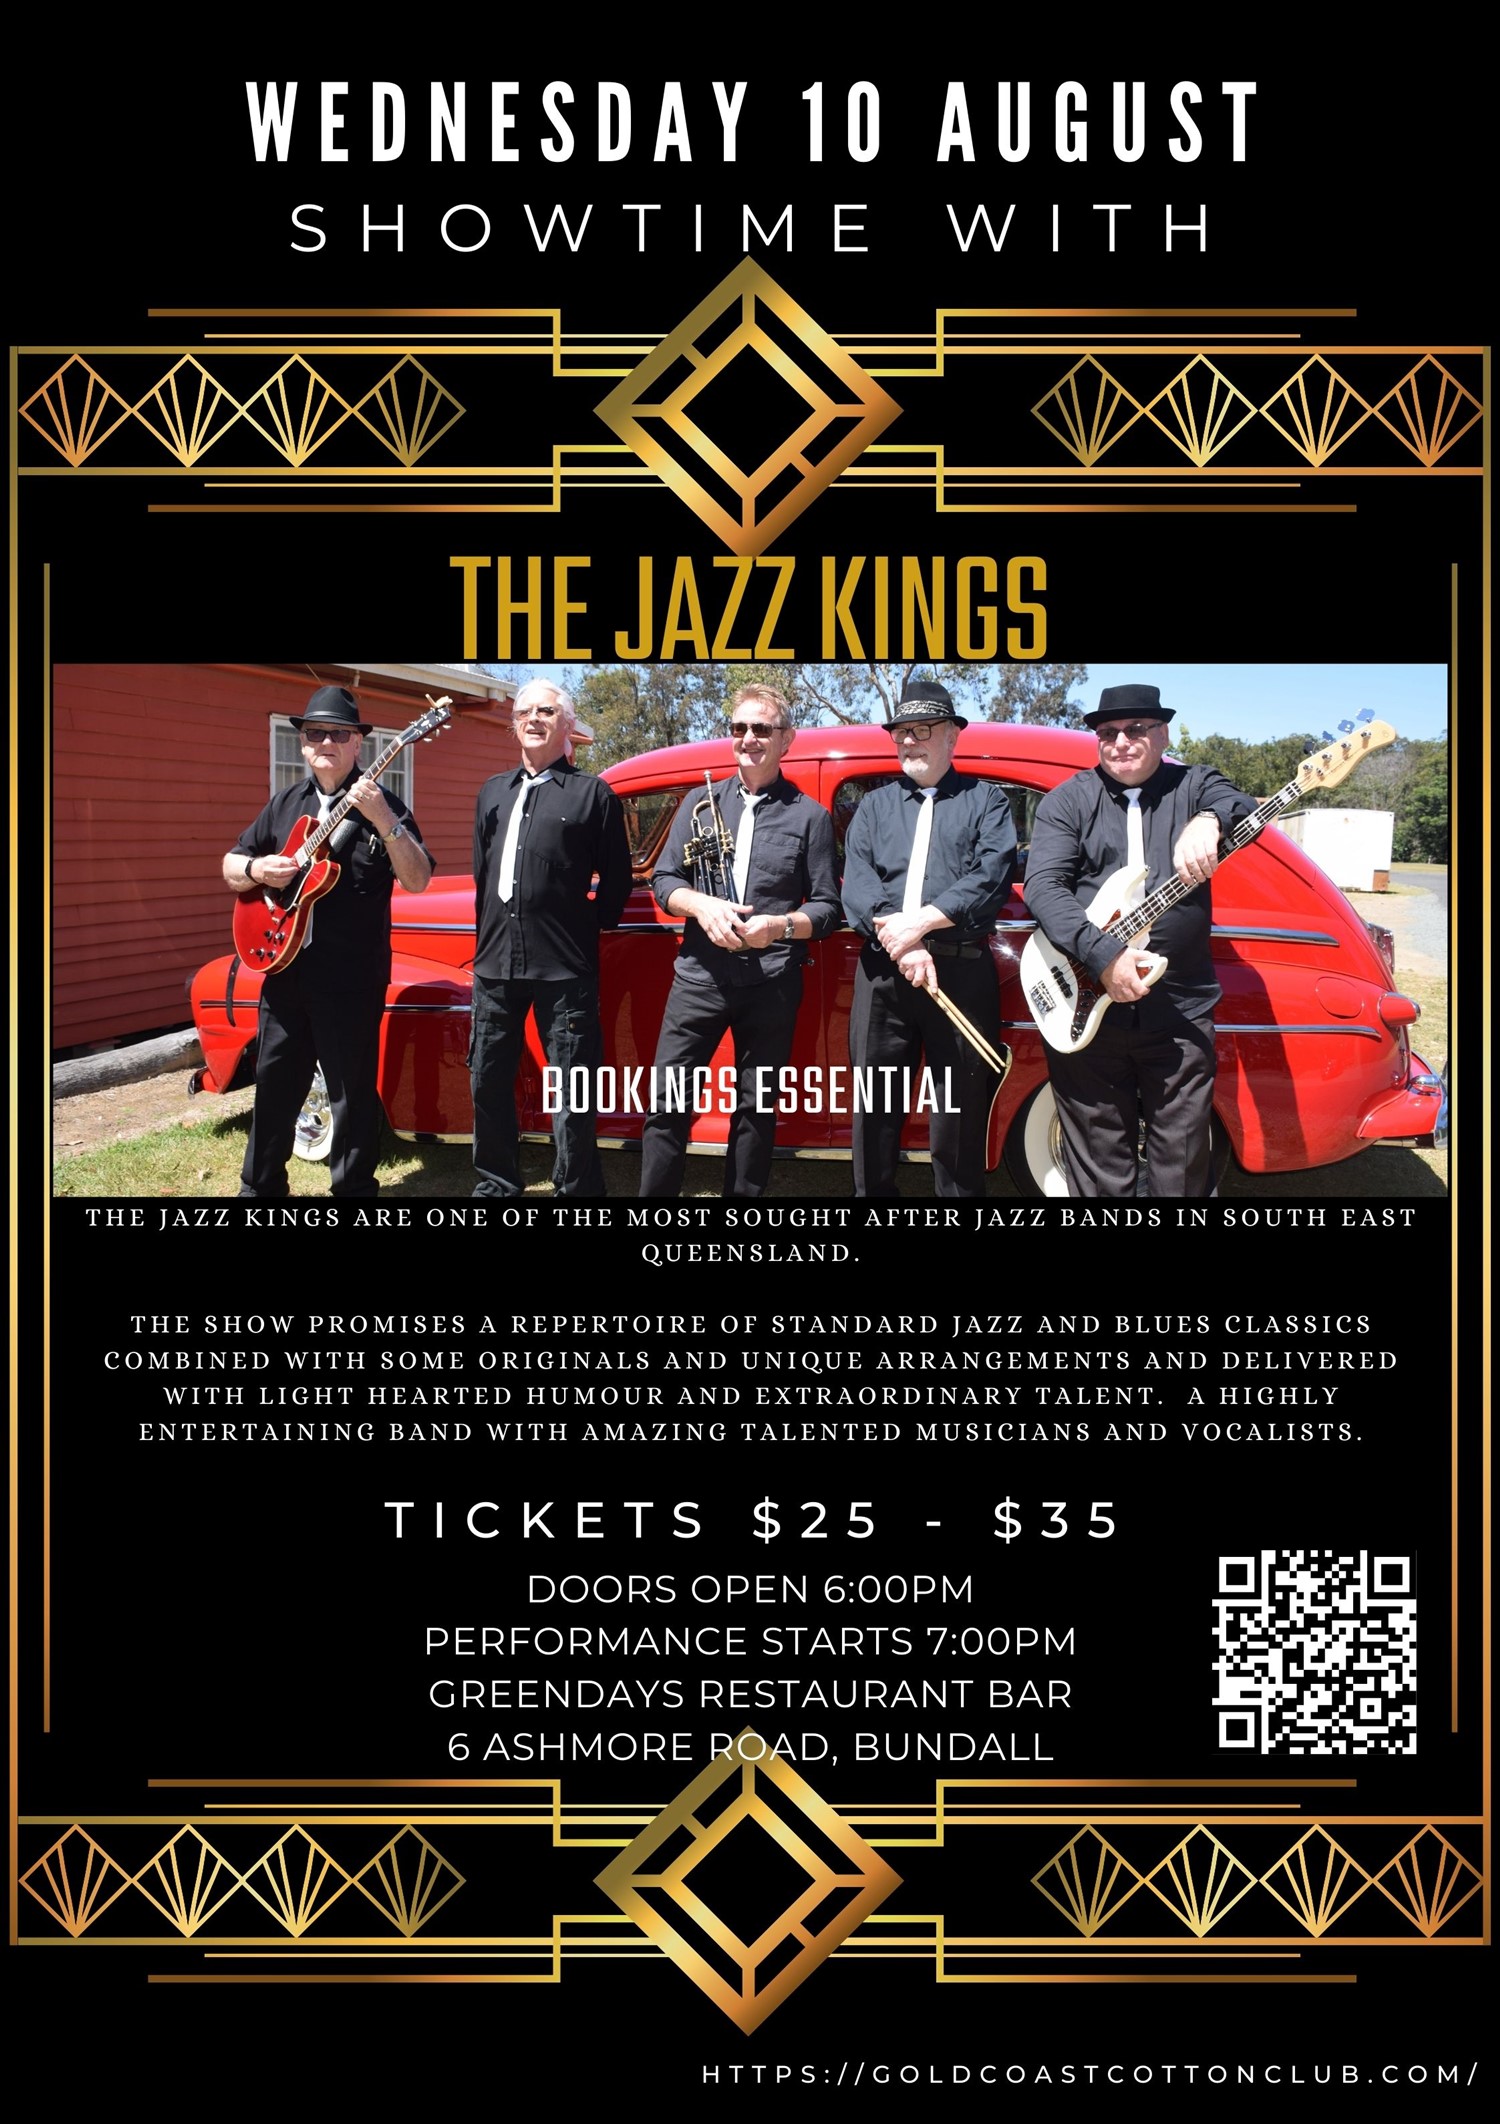 The Jazz Kings  on Aug 03, 18:00@The Cotton Club - Greendays Restaurant - Buy tickets and Get information on  